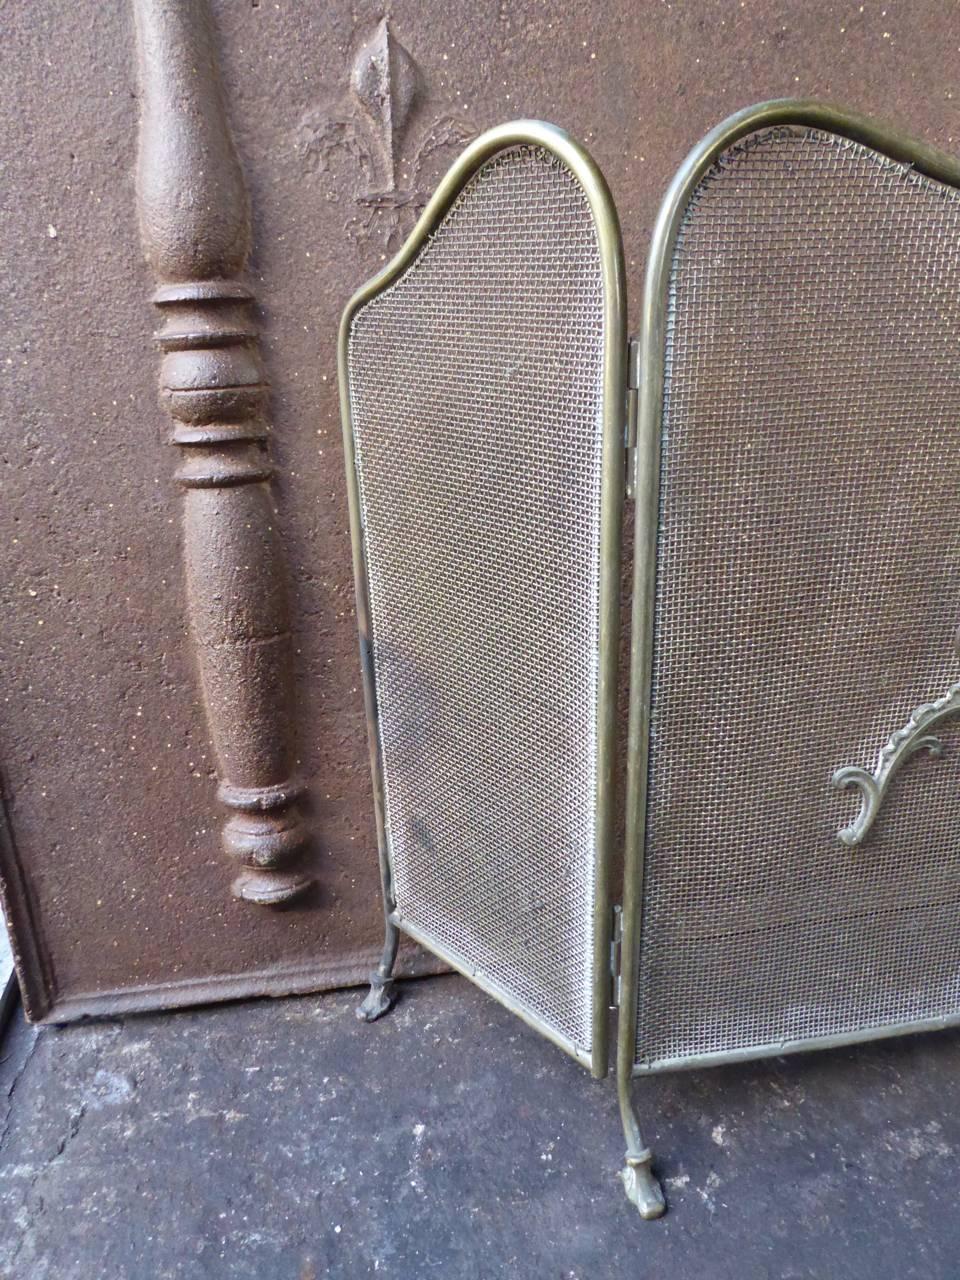 British 19th Century English Victorian Fireplace Screen or Fire Screen